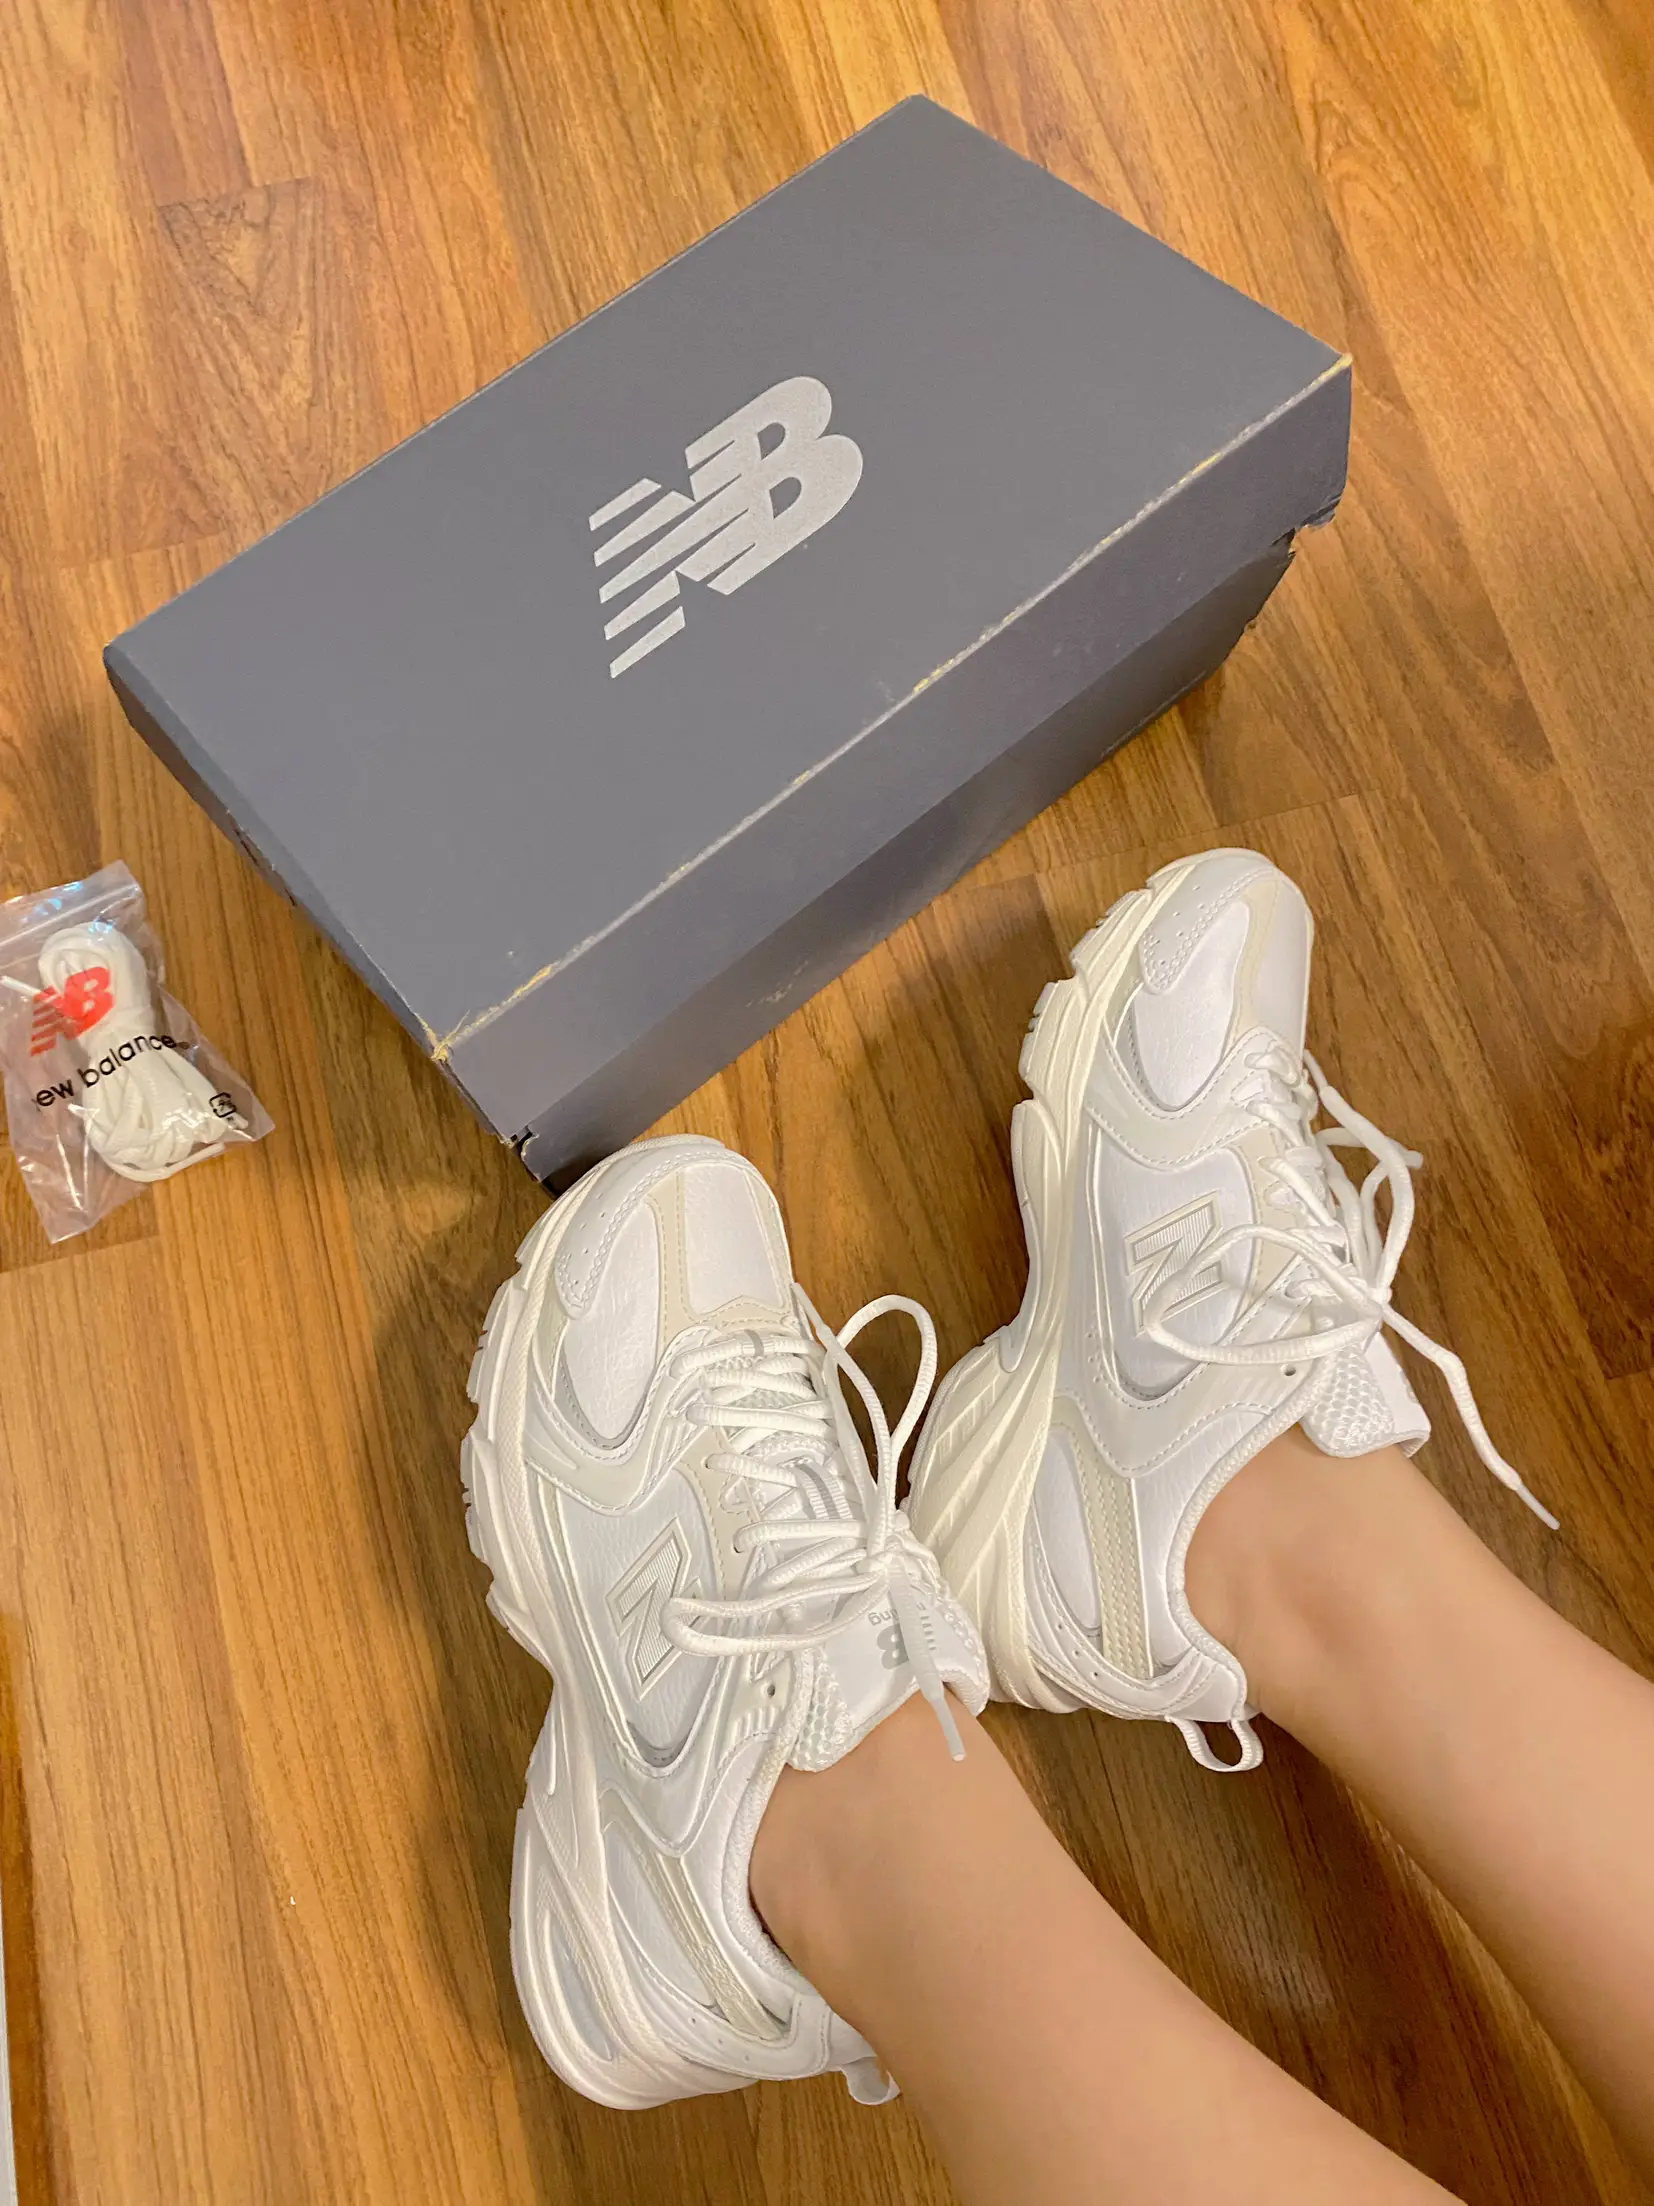 1 Day with New Balance 530rc 👟 | Gallery posted by Beer., | Lemon8